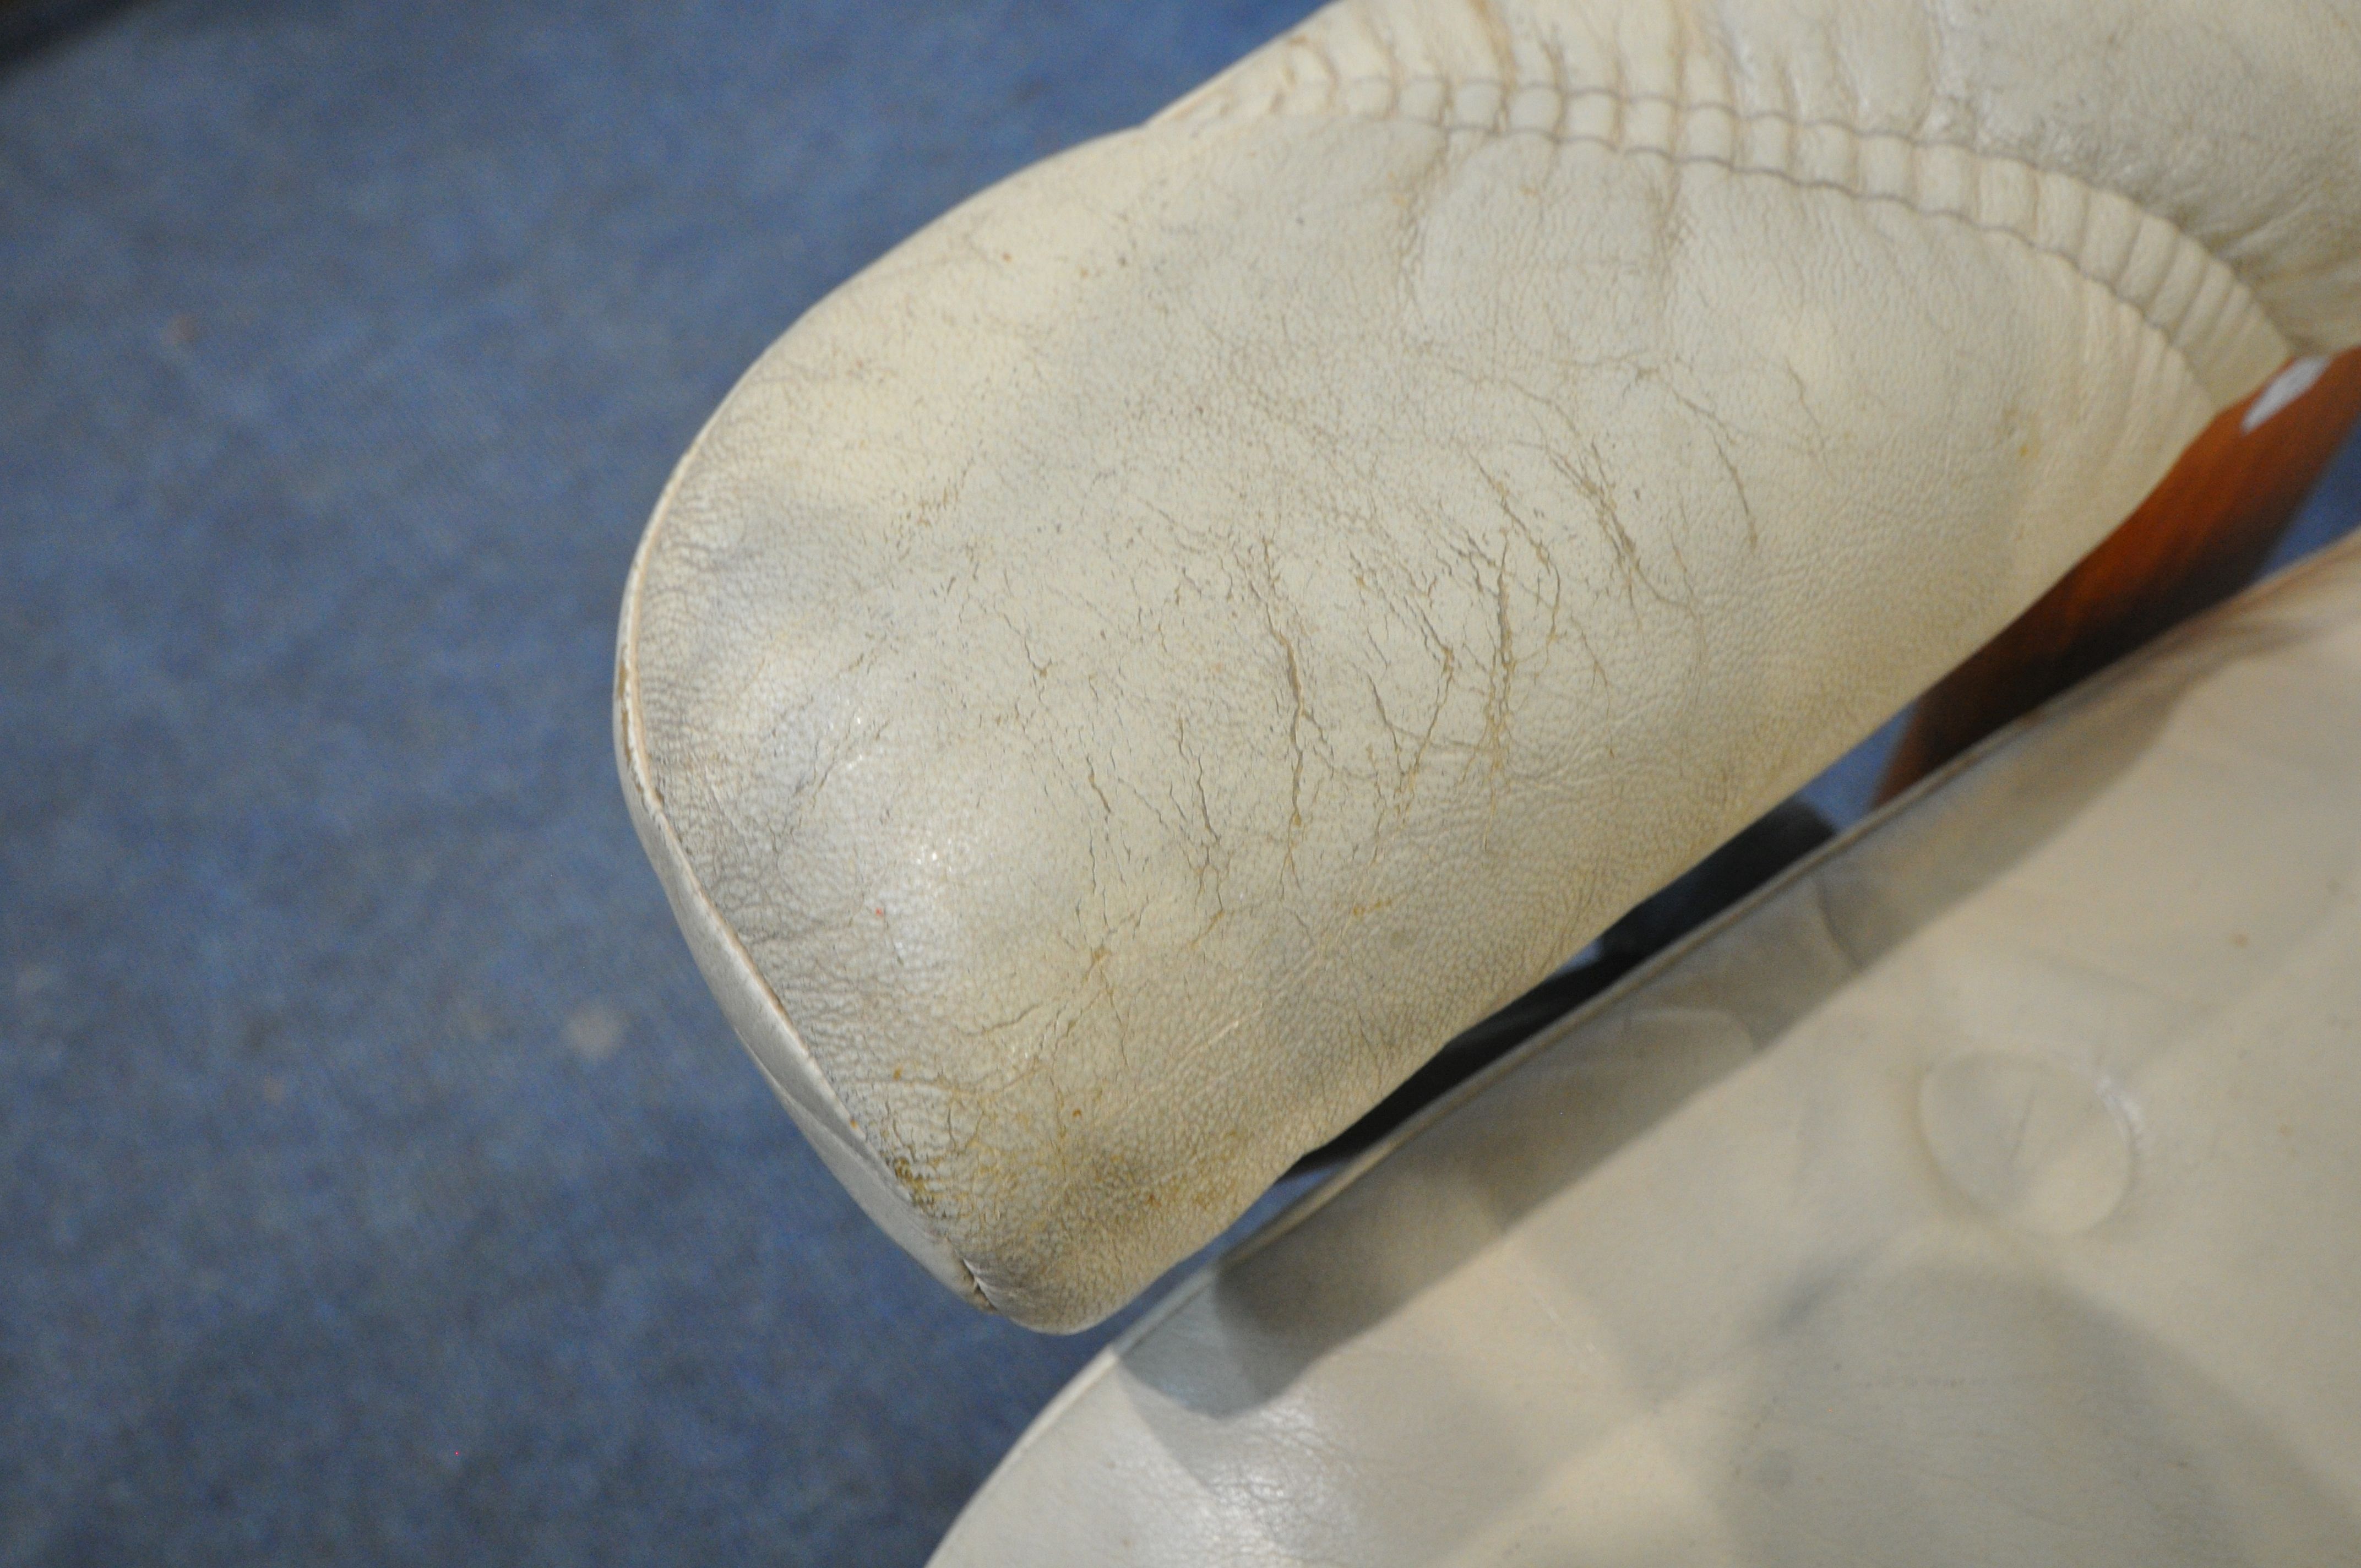 AN EKORNES STRESSLESS CREAM LEATHER SWIVEL RECLINING ARMCHAIR, along with a footstool (condition - Image 3 of 5